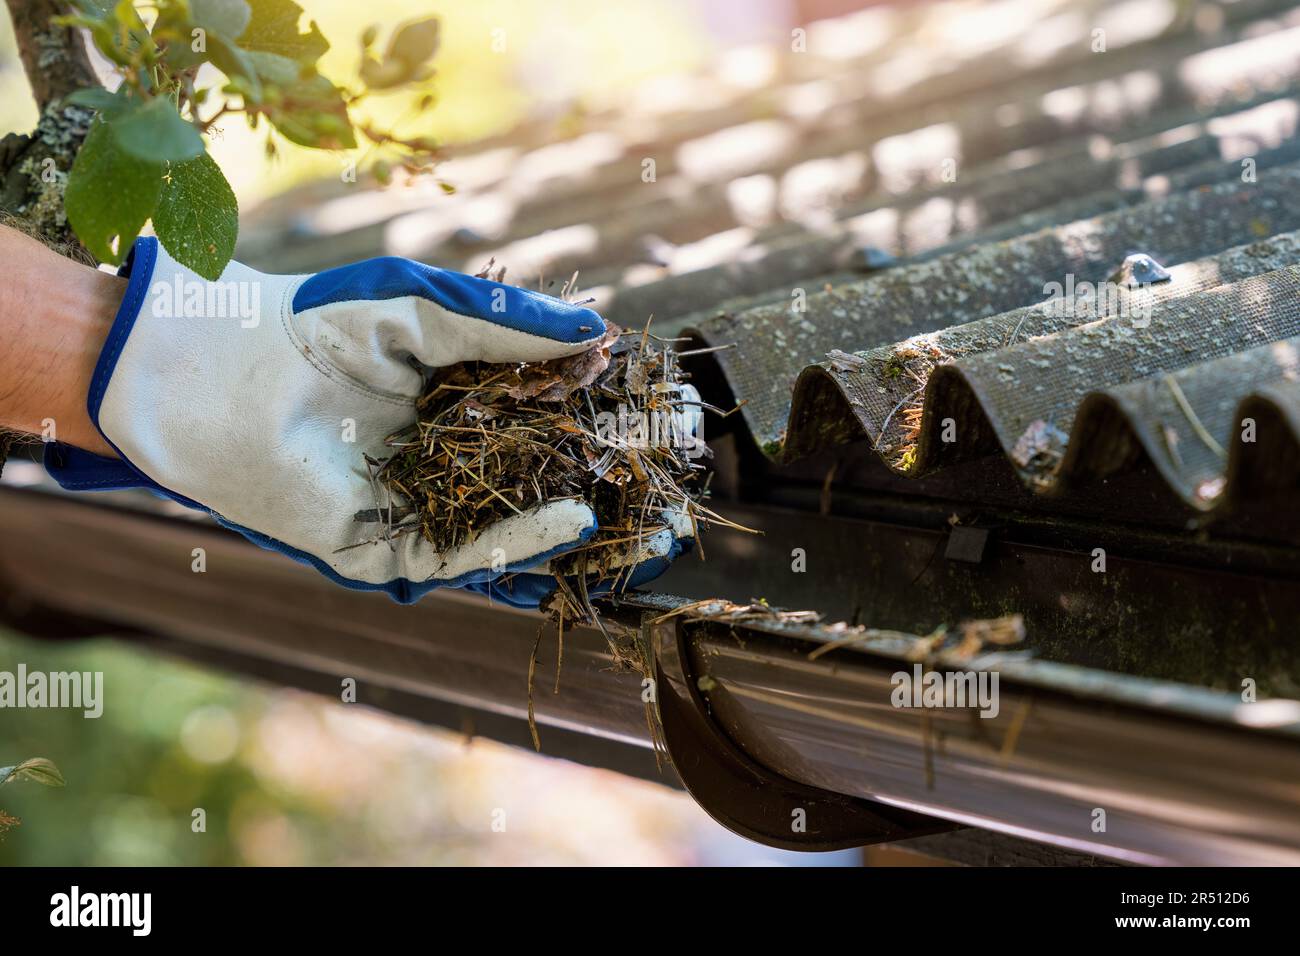 hand with glove cleaning house gutter from leaves and needles Stock Photo